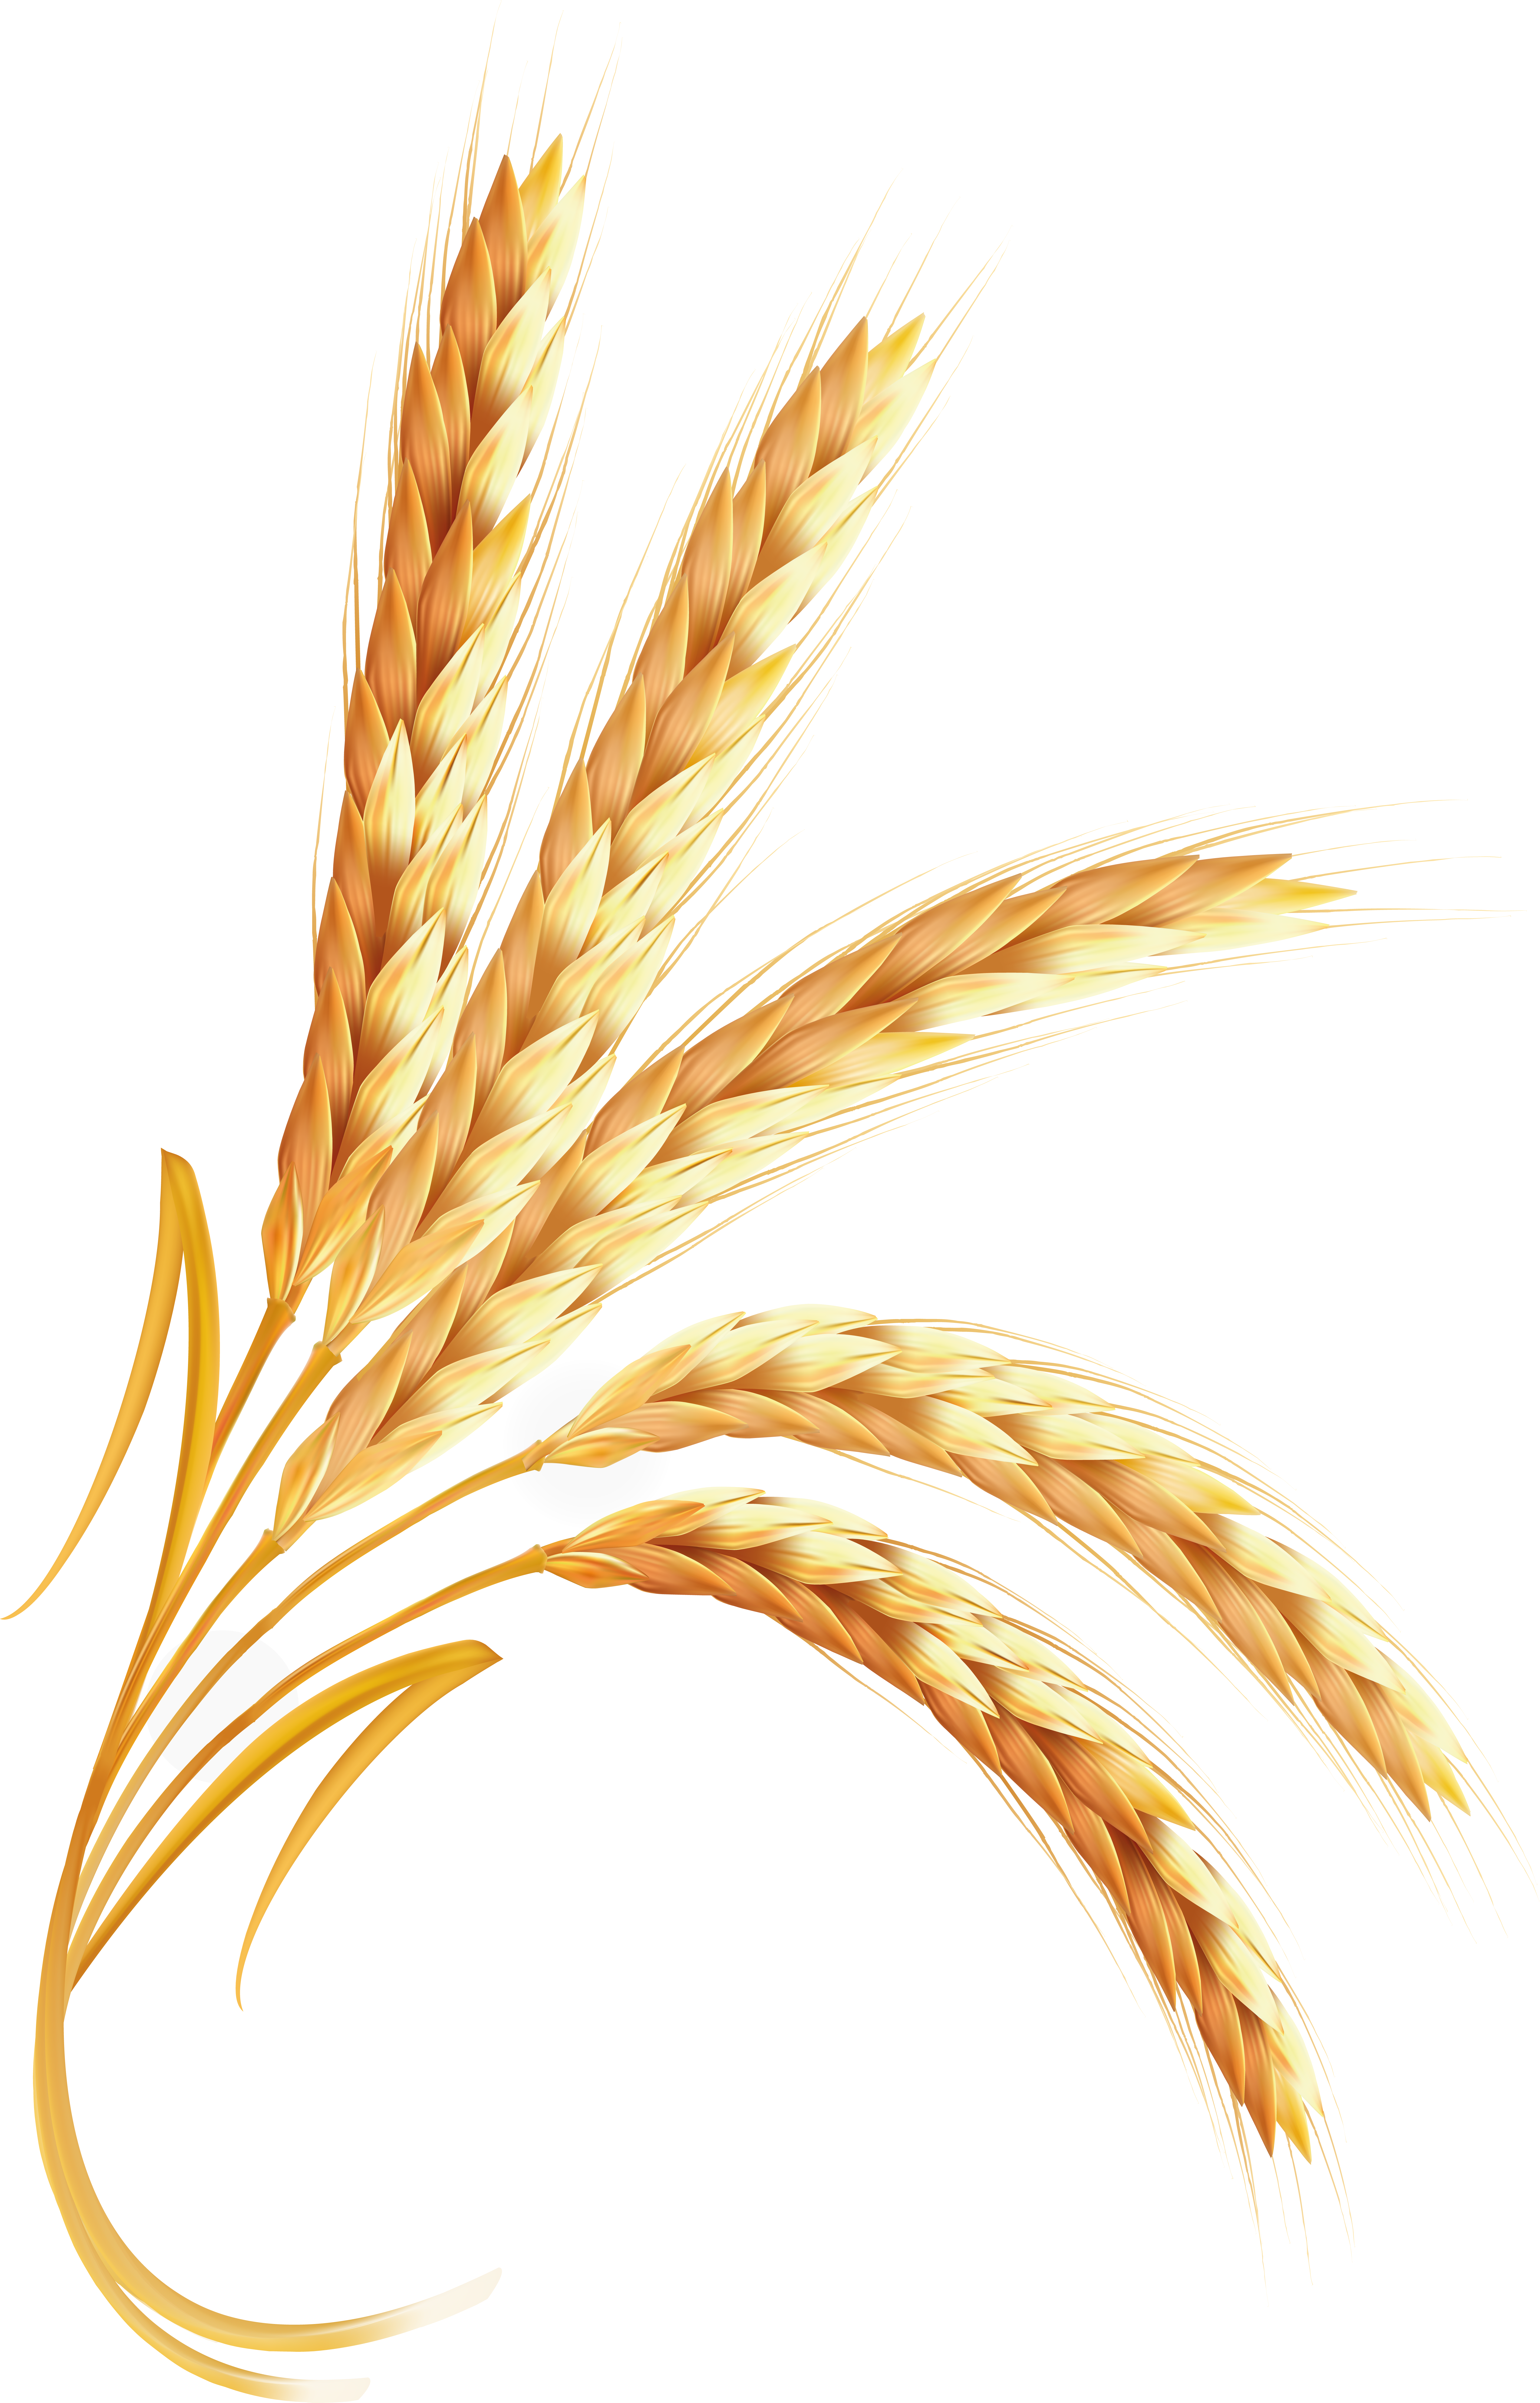 New Wheat Symbol Images PNG Transparent Background, Free Download